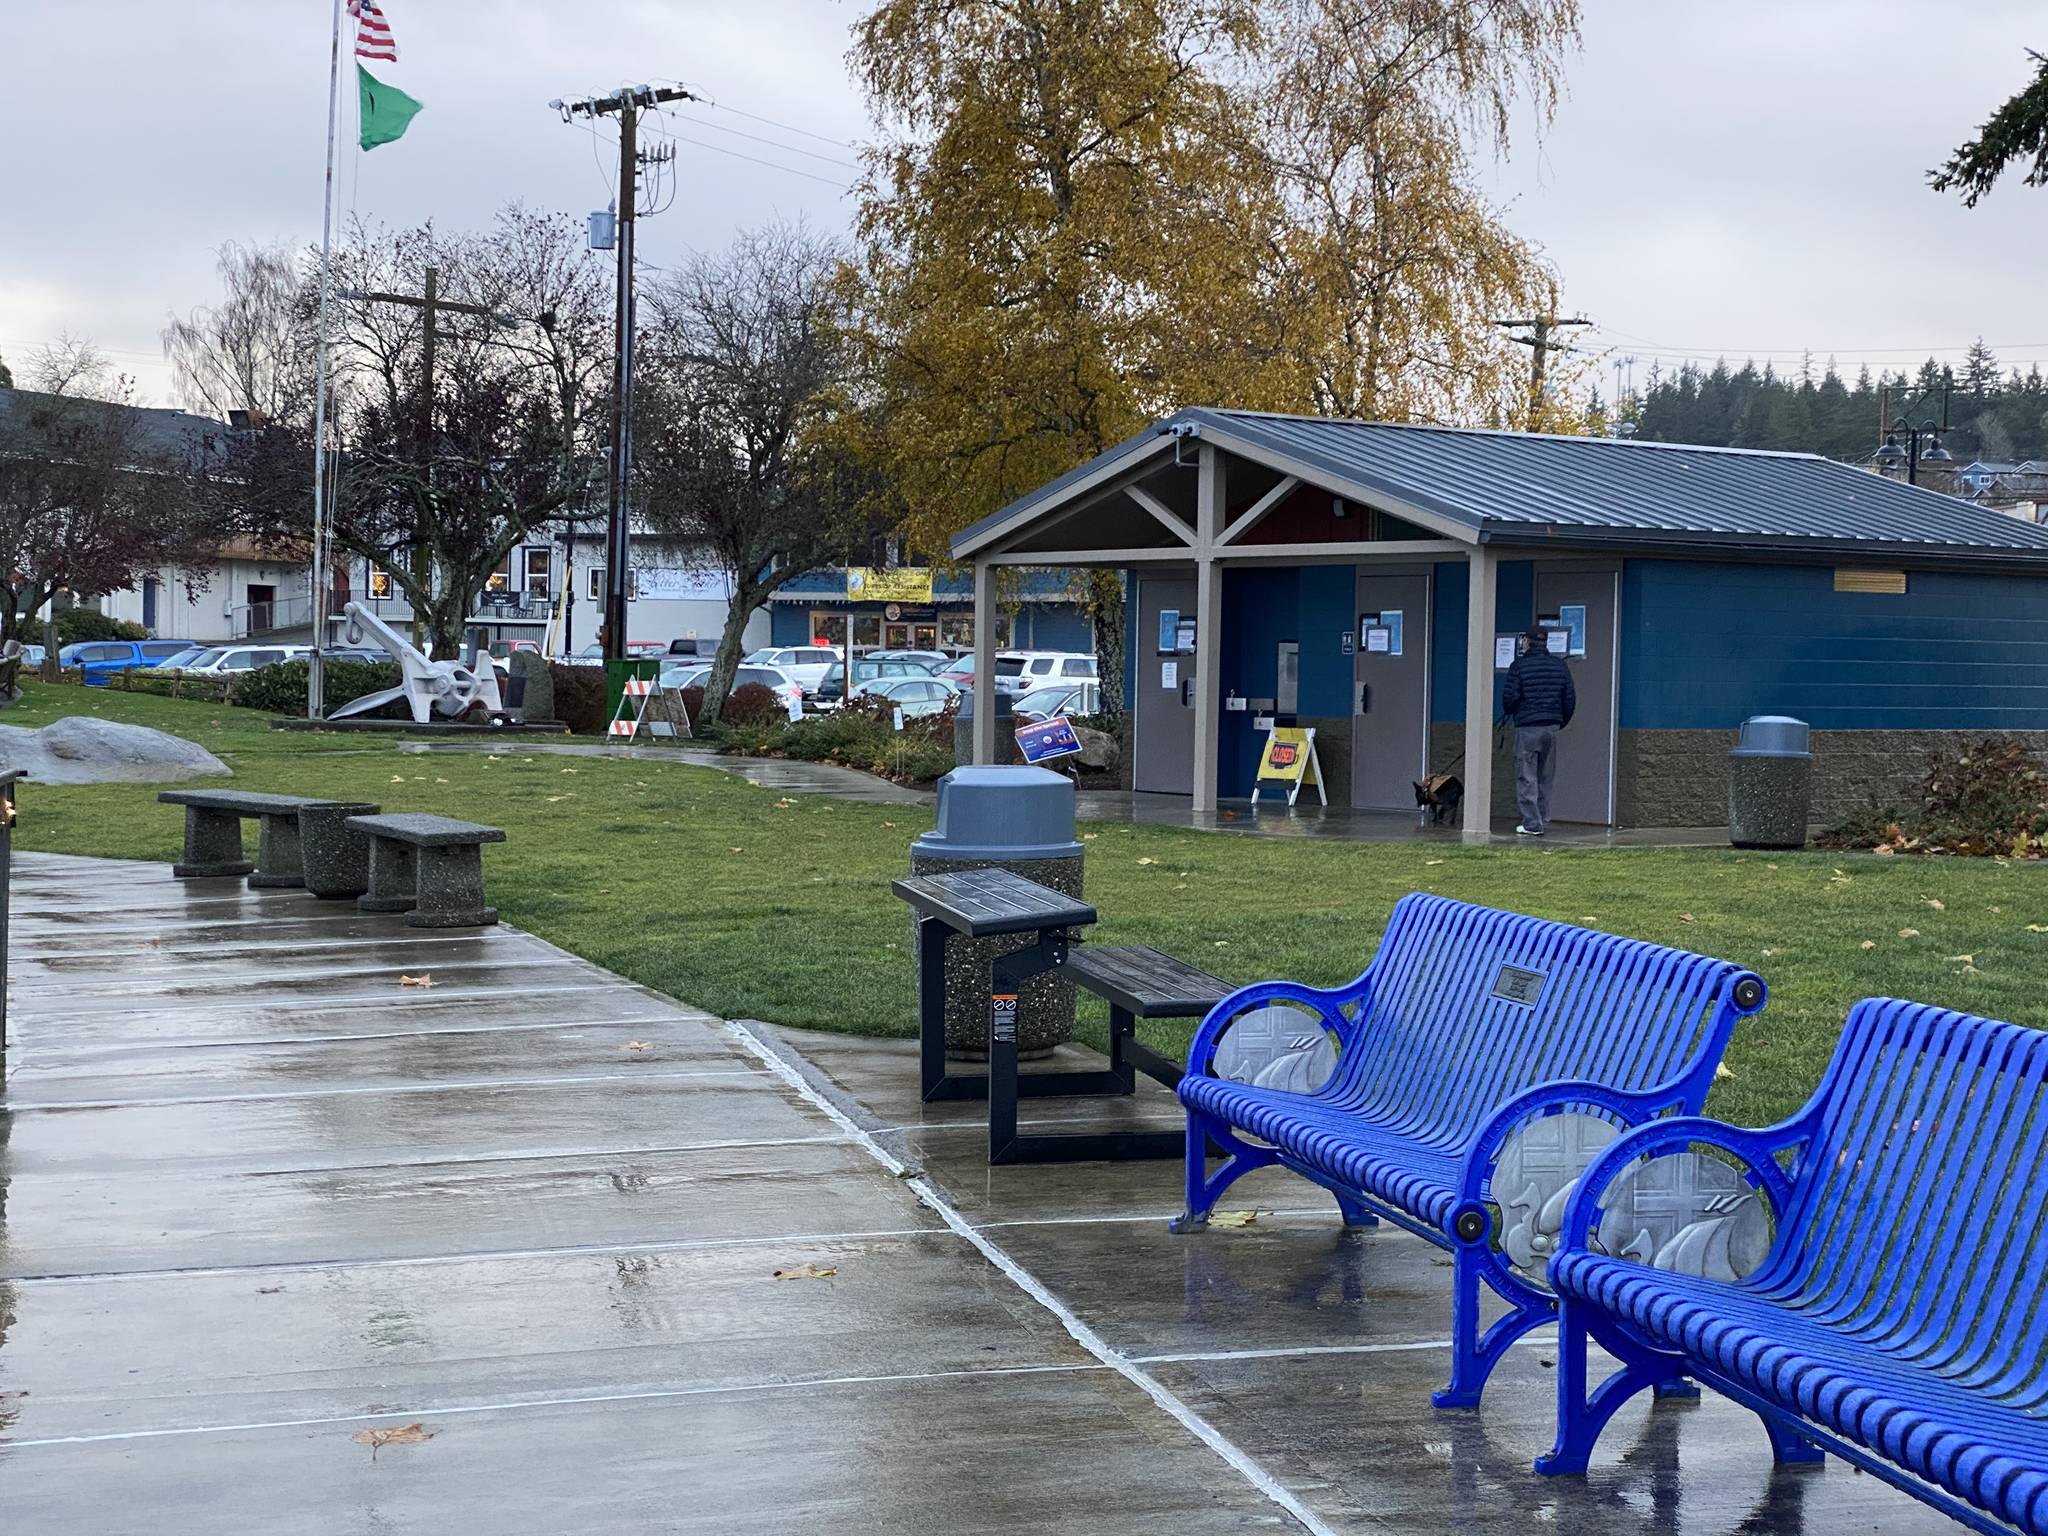 Poulsbo Parks and Recreation is preparing for 2021 and a post COVID-19 world. Ken Park/North Kitsap Herald